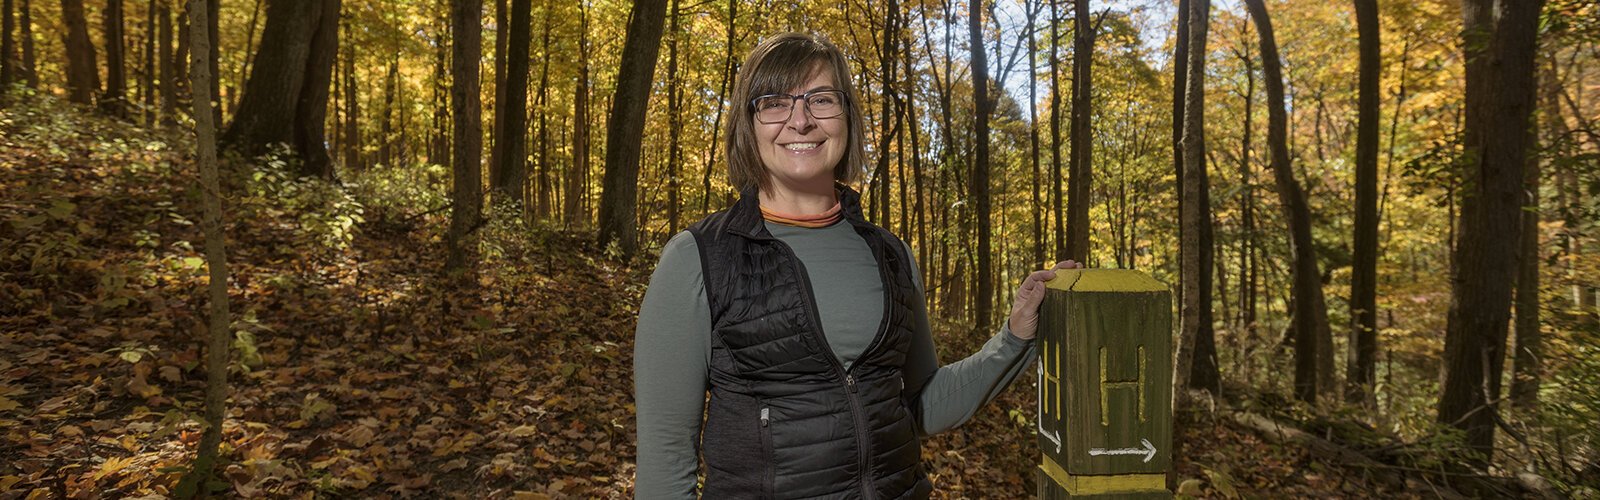 Mt. Airy Forest Advisory Council (MAFAC) member Cynthia Duval has been involved with the Council for three years. She loves Mt. Airy Forest because of the refuge it provides in such close proximity to the highway and urban surroundings.